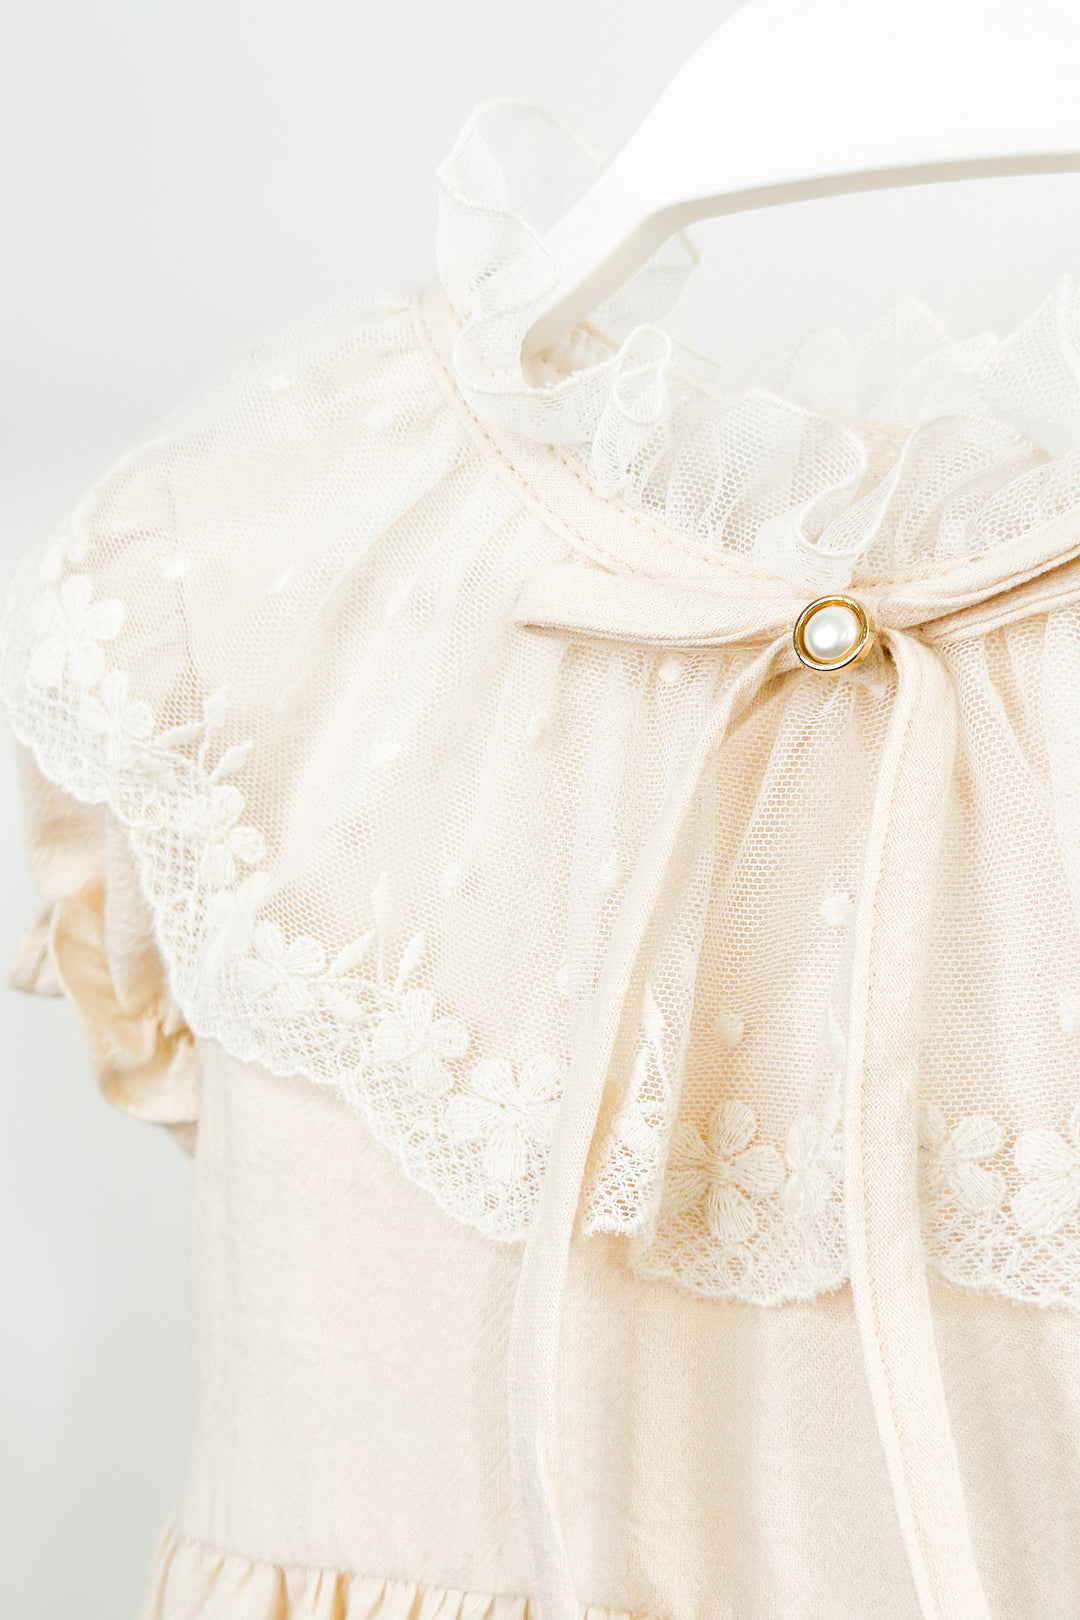 Fofettes "Arabella" Apricot Lace Collar Dress | Millie and John